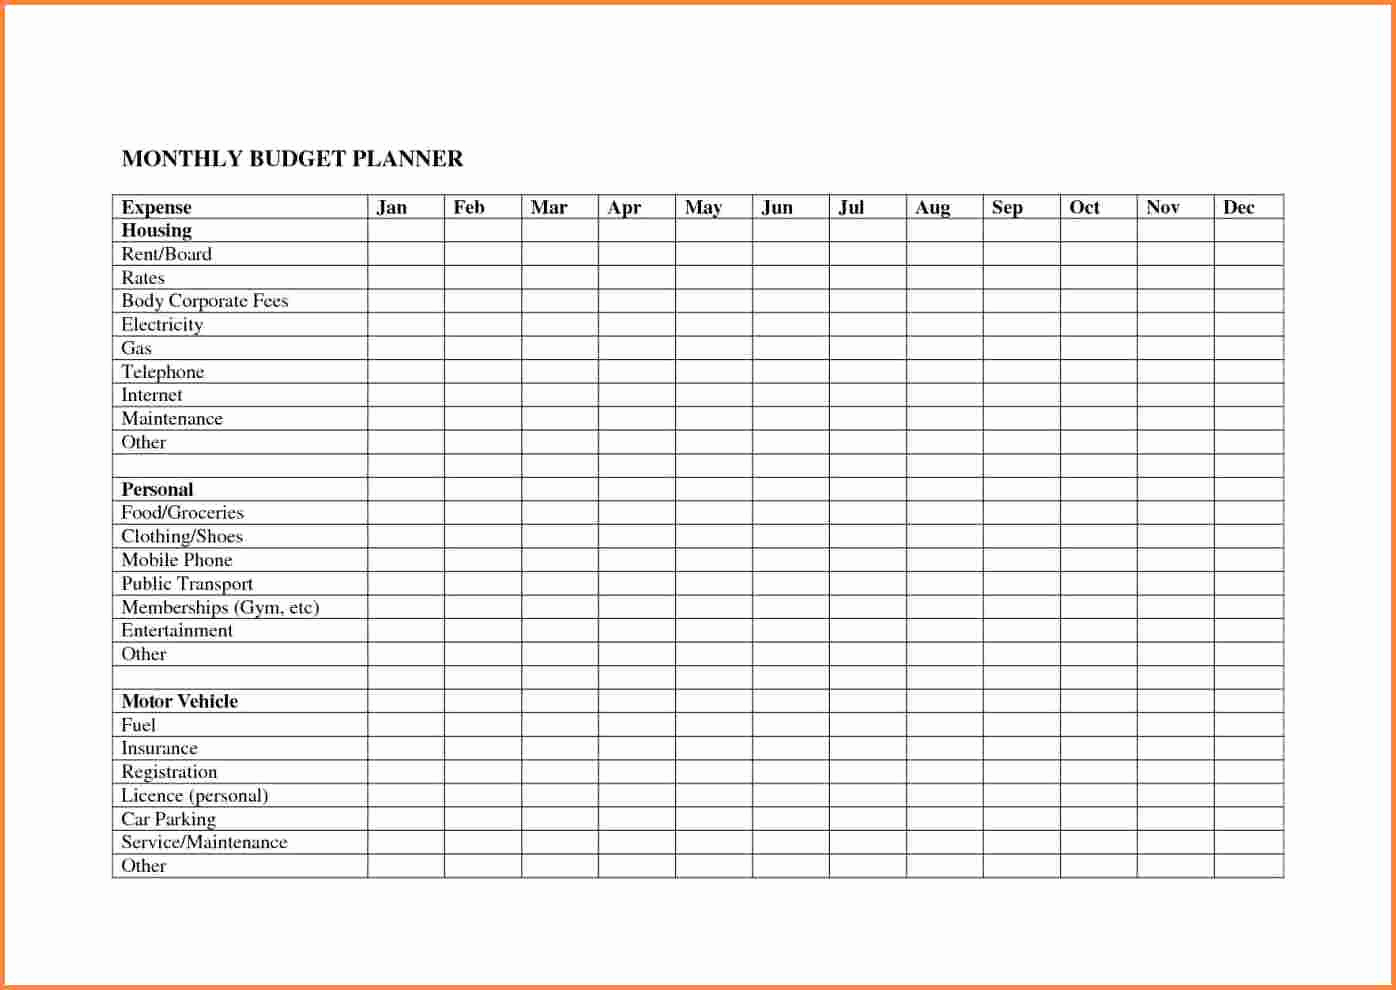 Monthly Budget Worksheet Excel Luxury 10 Monthly Bud Planner Spreadsheet